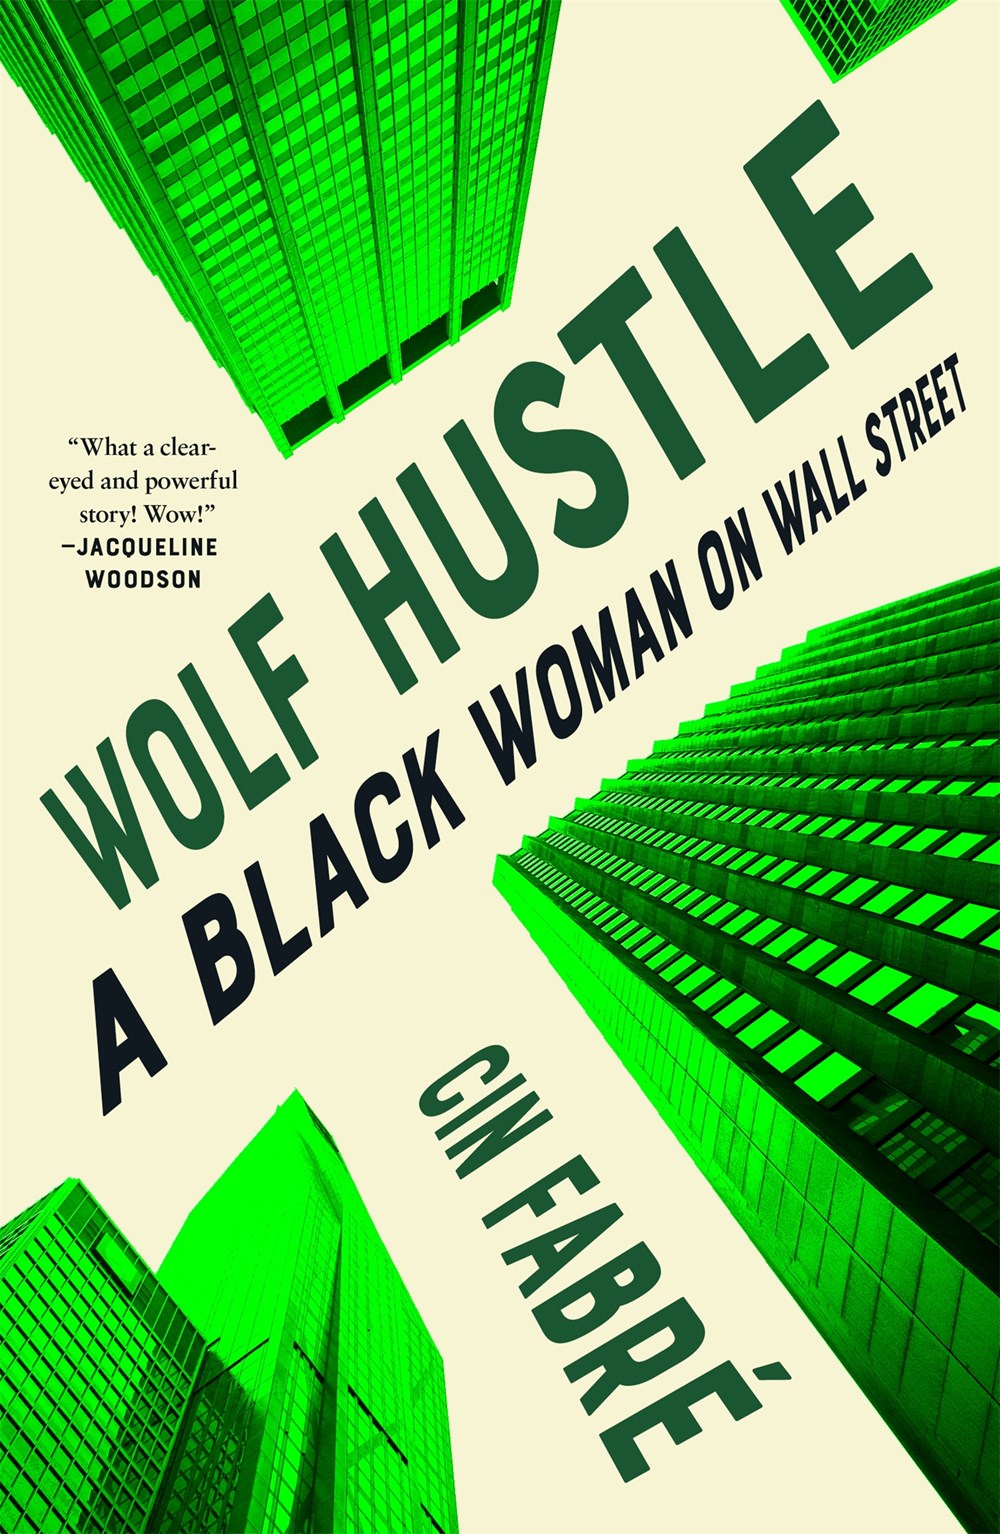 Wolf Hustle: A Black Woman on Wall Street – Kindred Stories